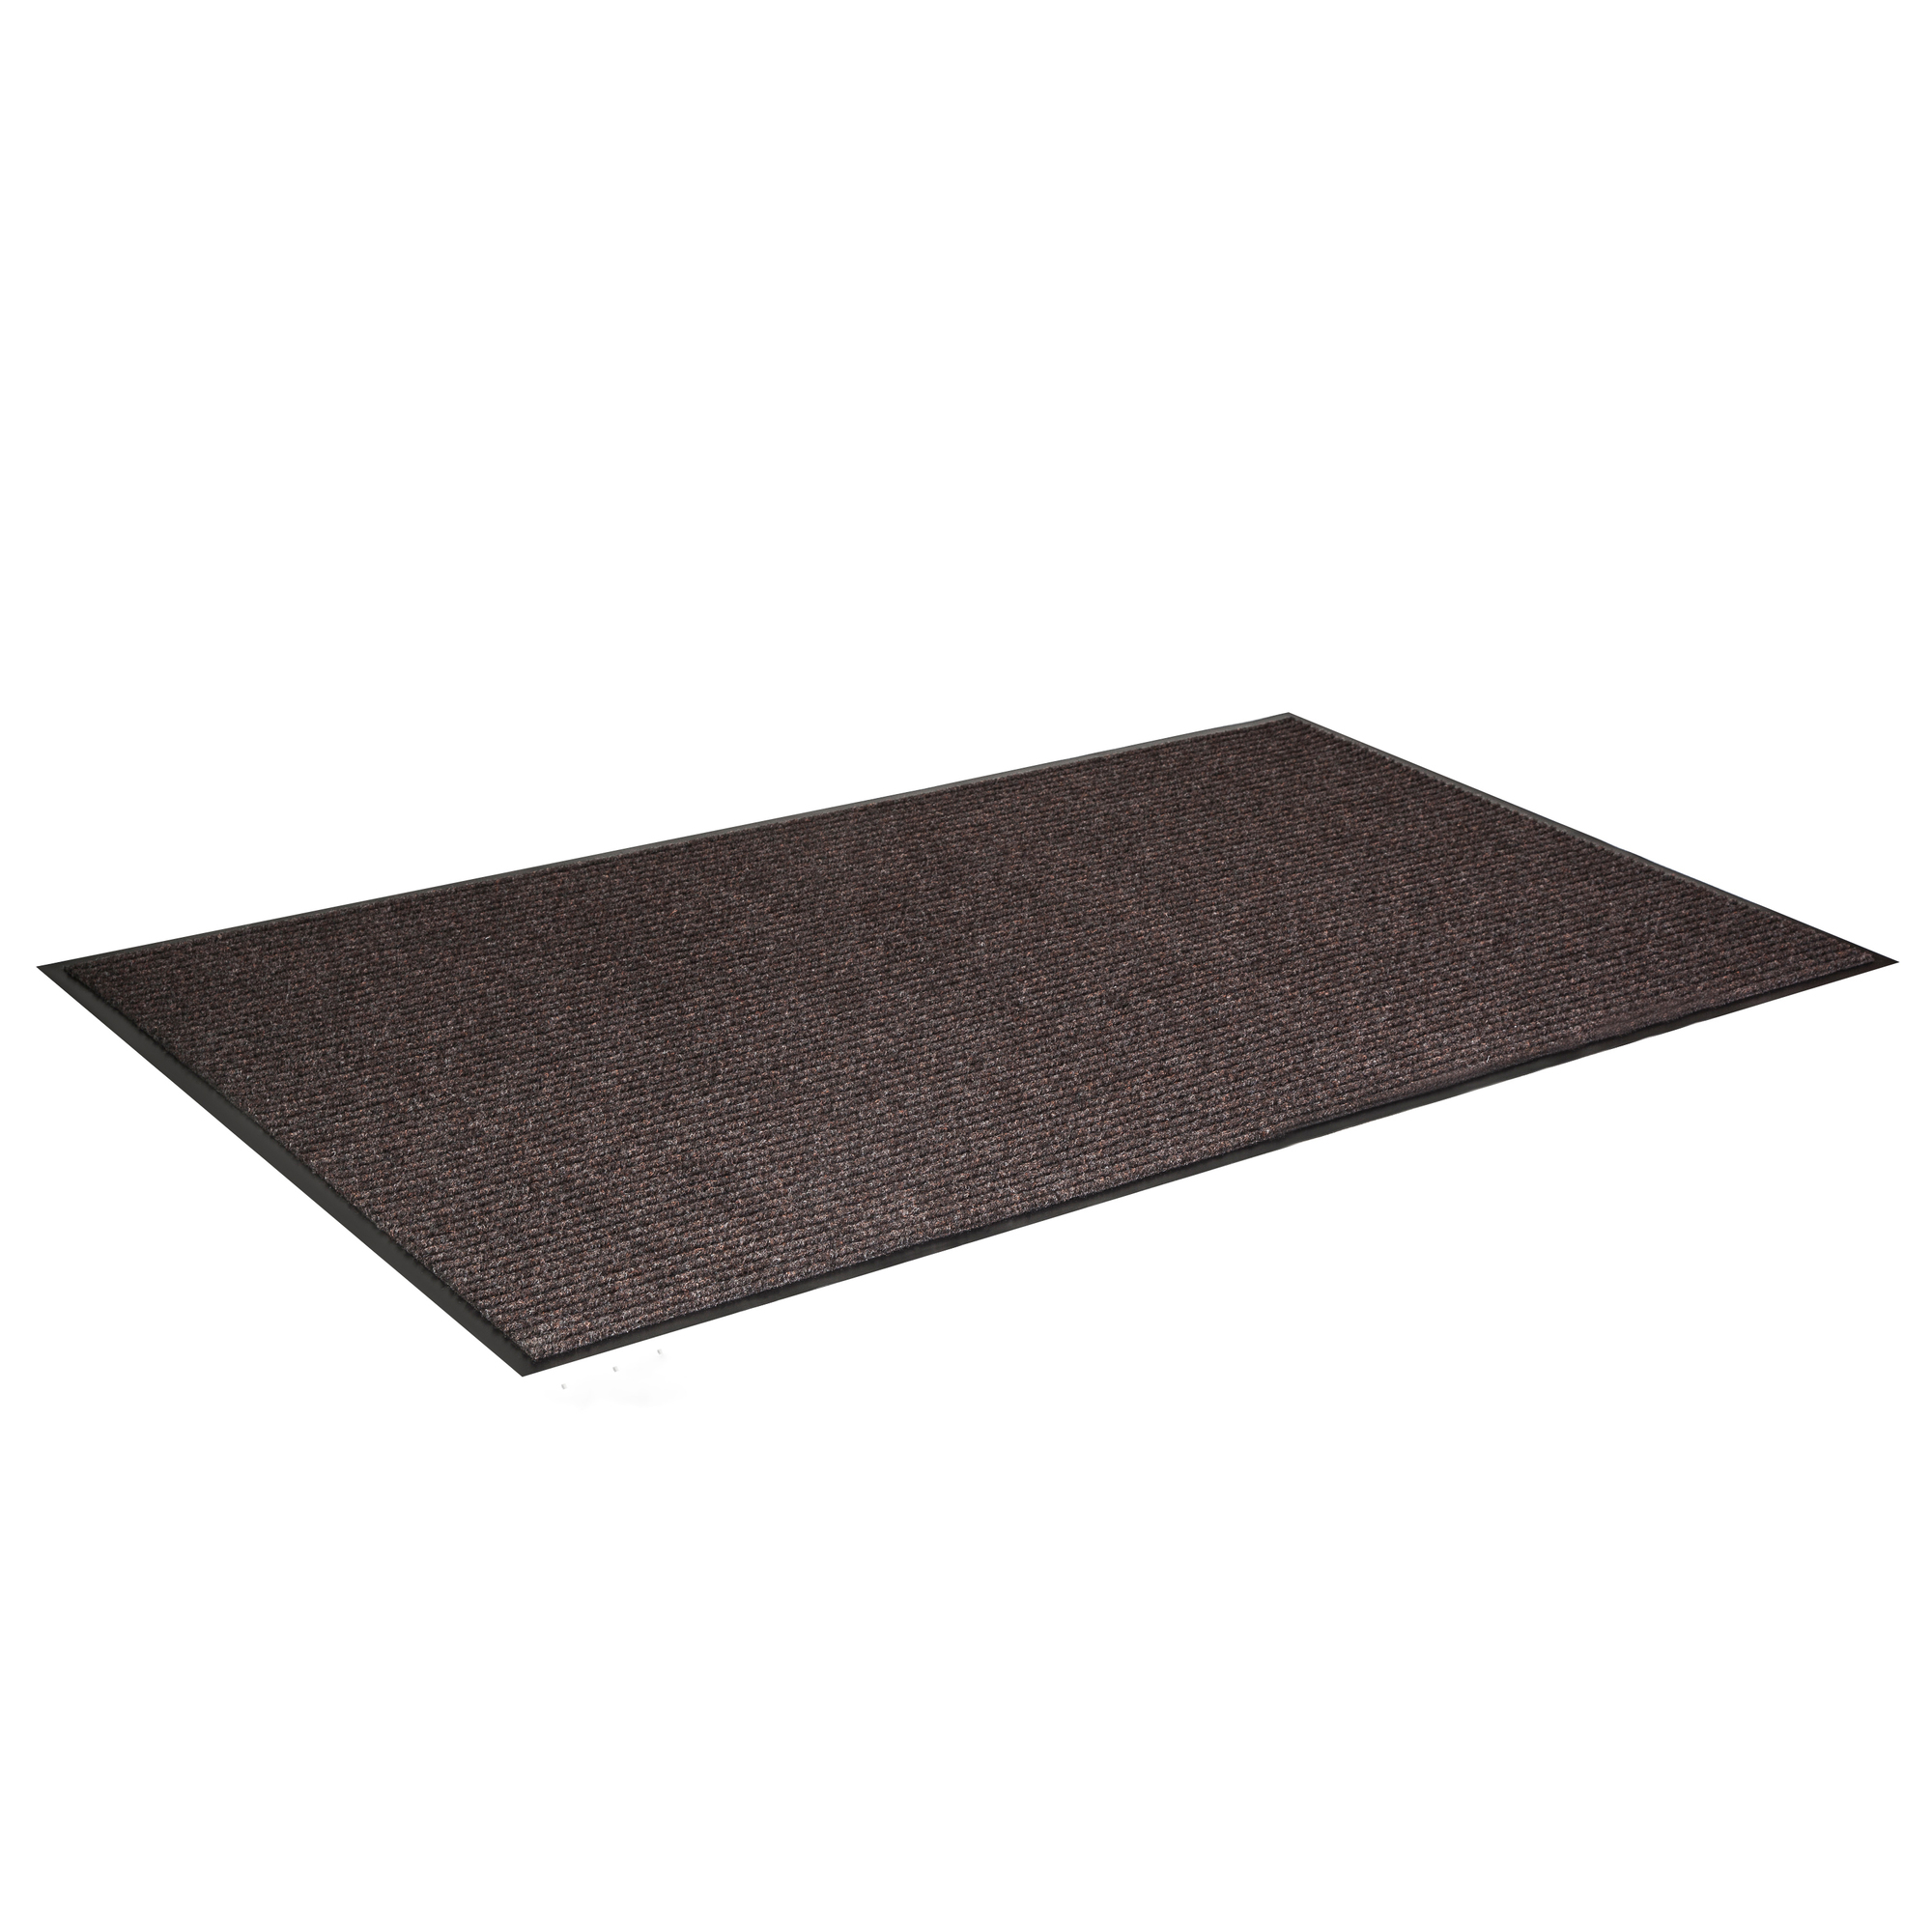 Crown Matting Technologies, Needle-Rib 4ft.x10ft. Brown, Width 48 in, Length 120 in, Thickness 5/16 in, Model NR 0410BR